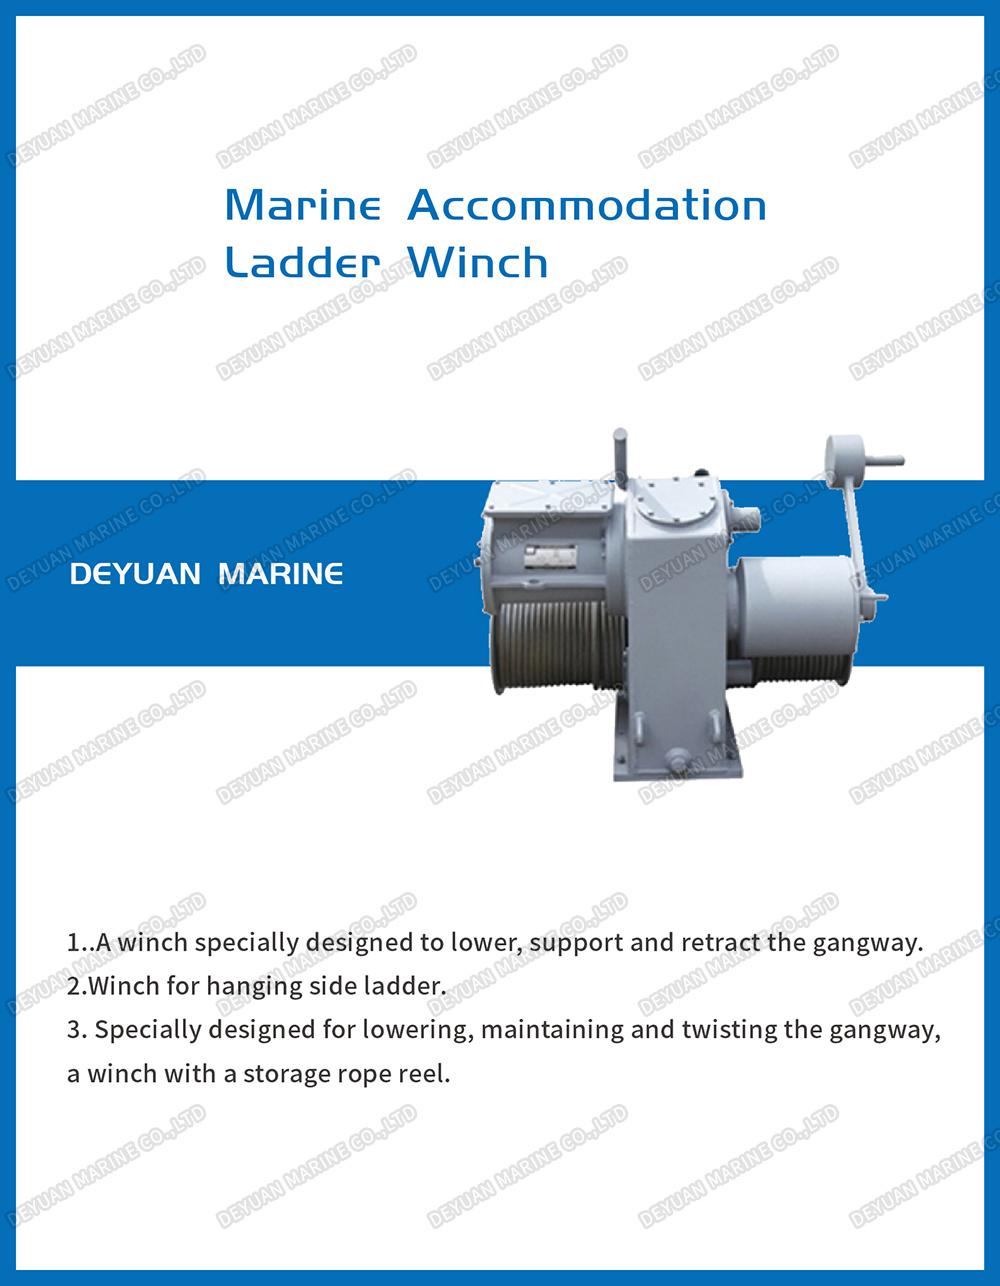 Lr Approved Marine Accommodation Electric Ladder Winch for Vessel